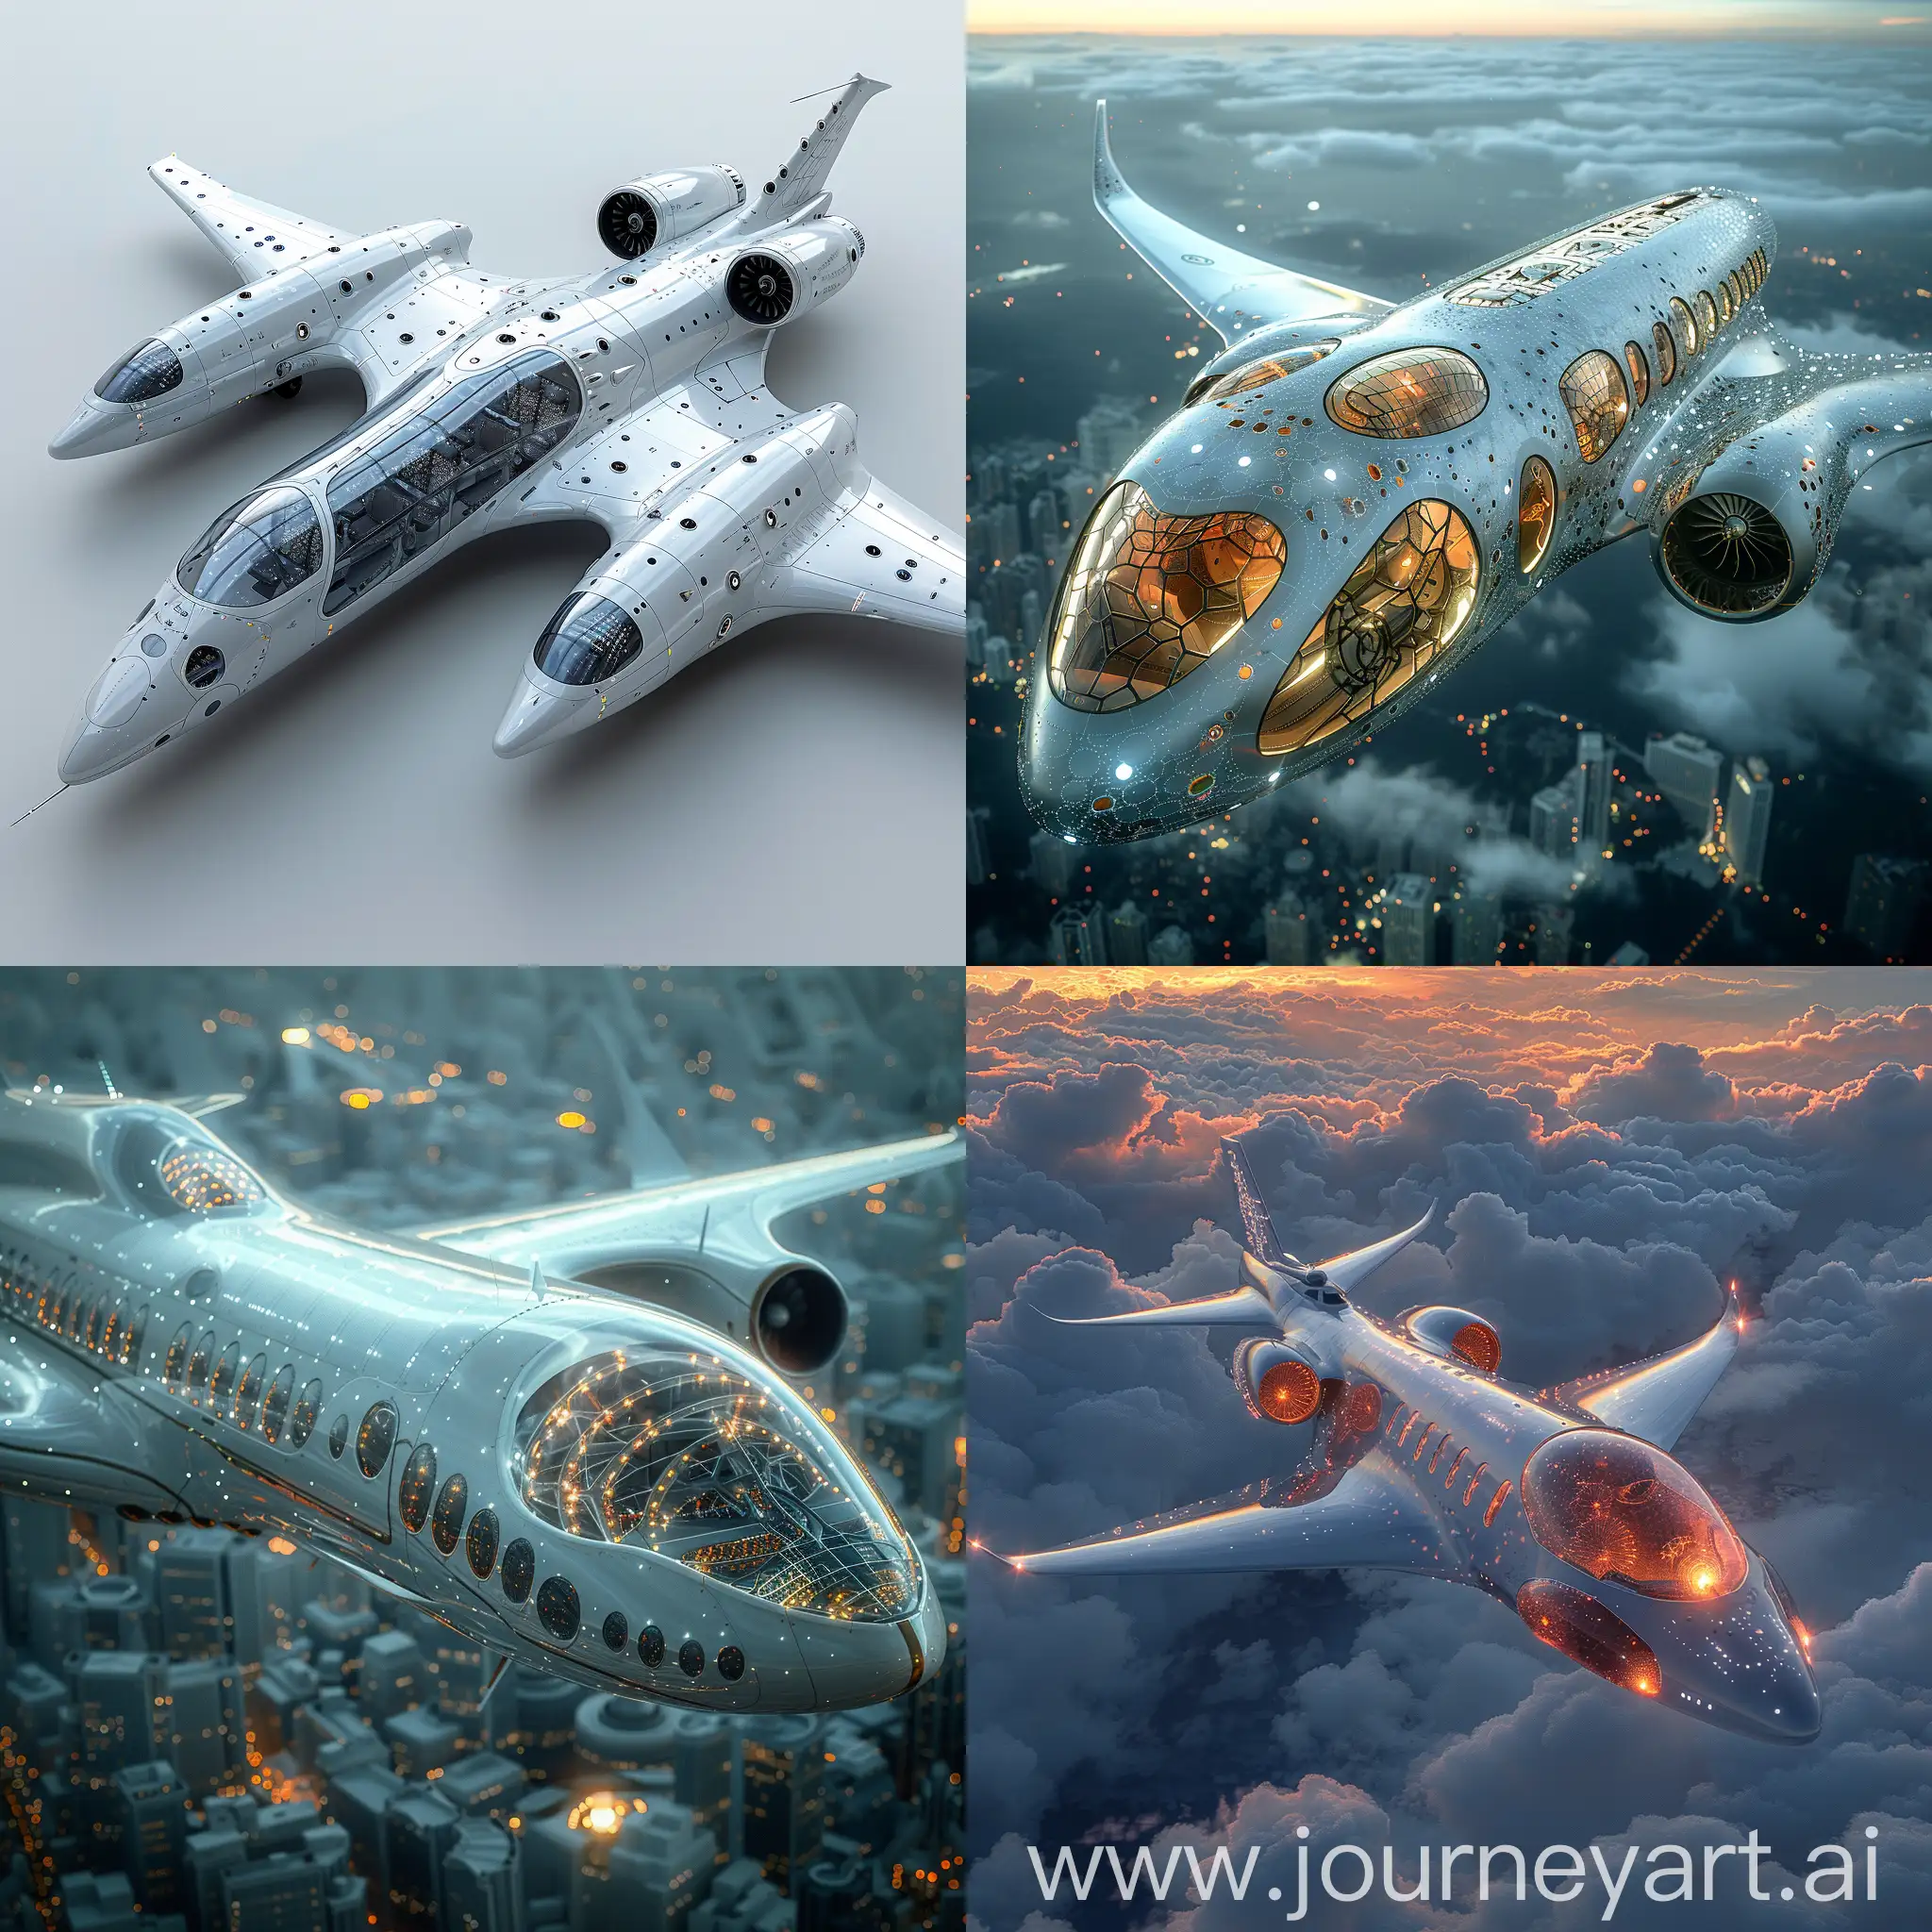 Futuristic-Passenger-Aircraft-with-Advanced-Composite-Materials-and-Smart-Features